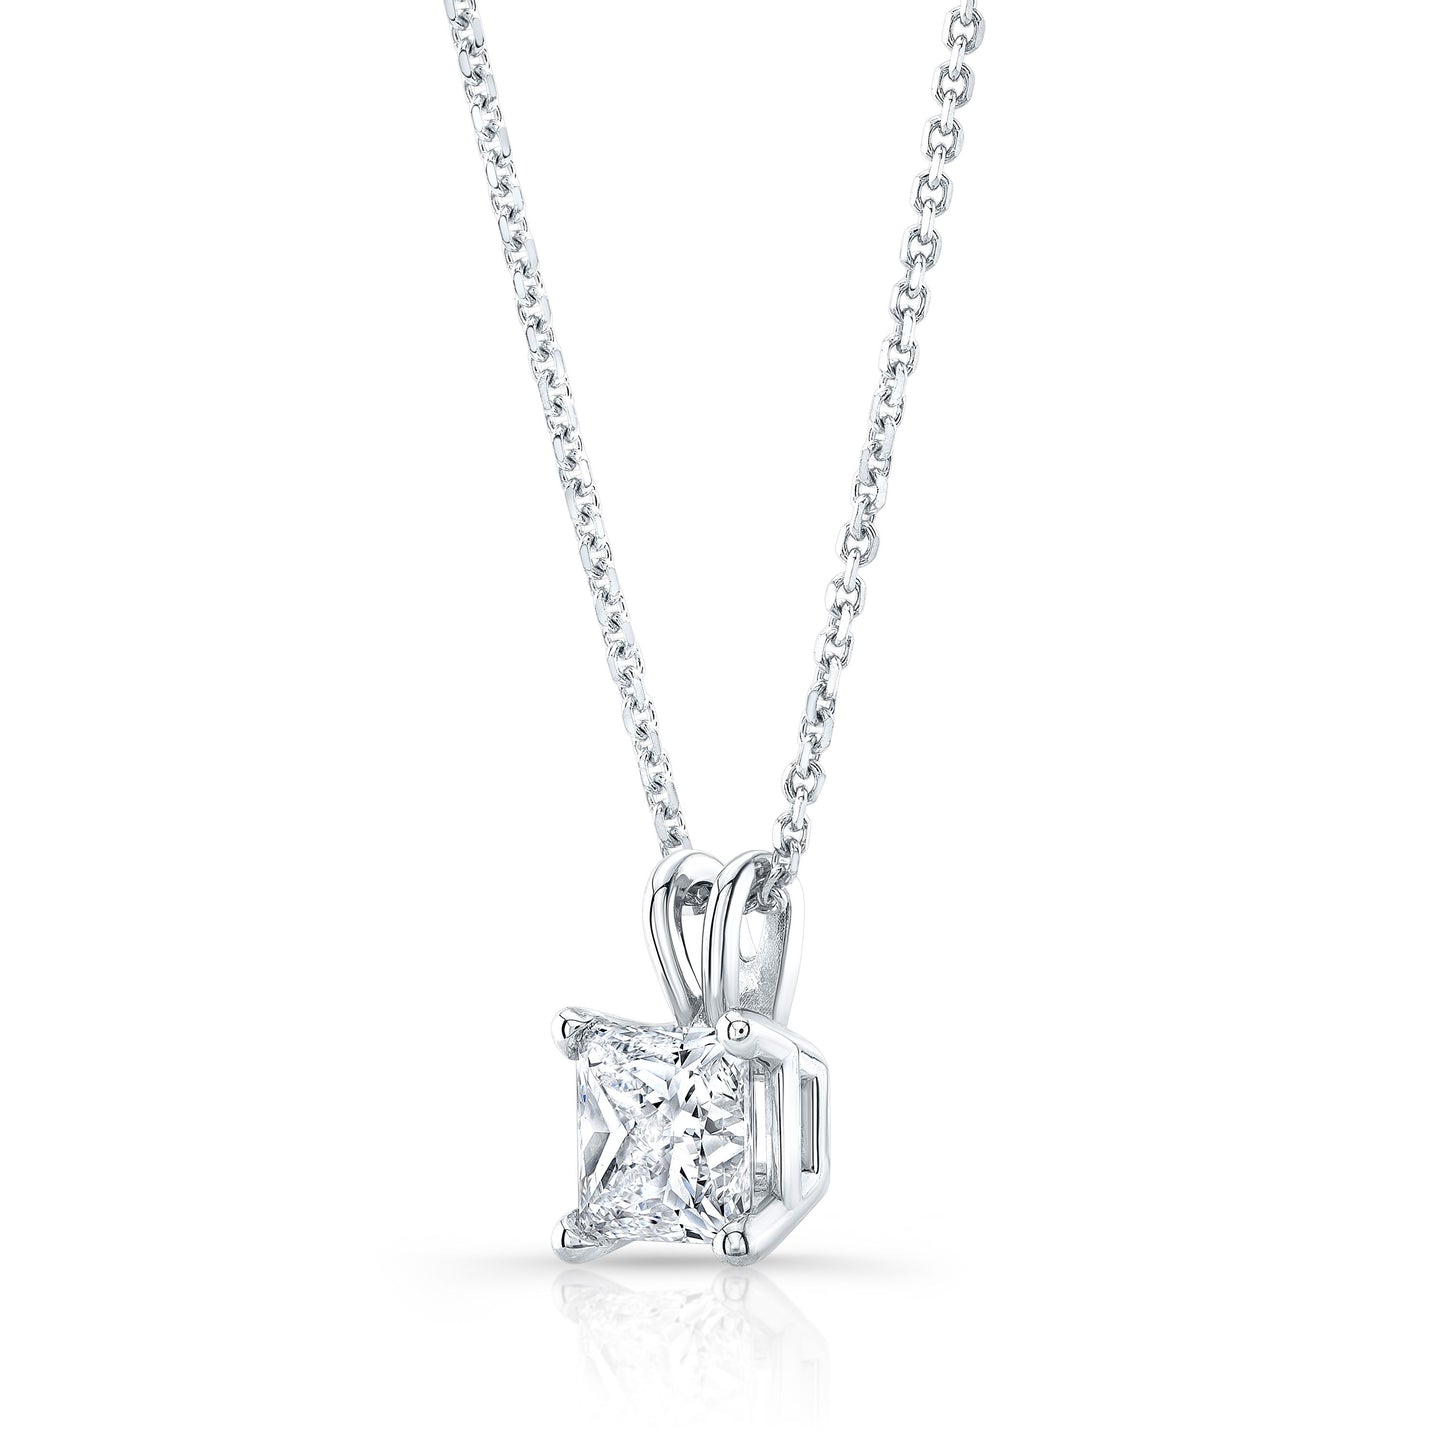 Princess Diamond Solitaire Pendant In A 14k White Gold 4-prong Basket Setting, 2ct. T.w. (hi, Si1-si2)